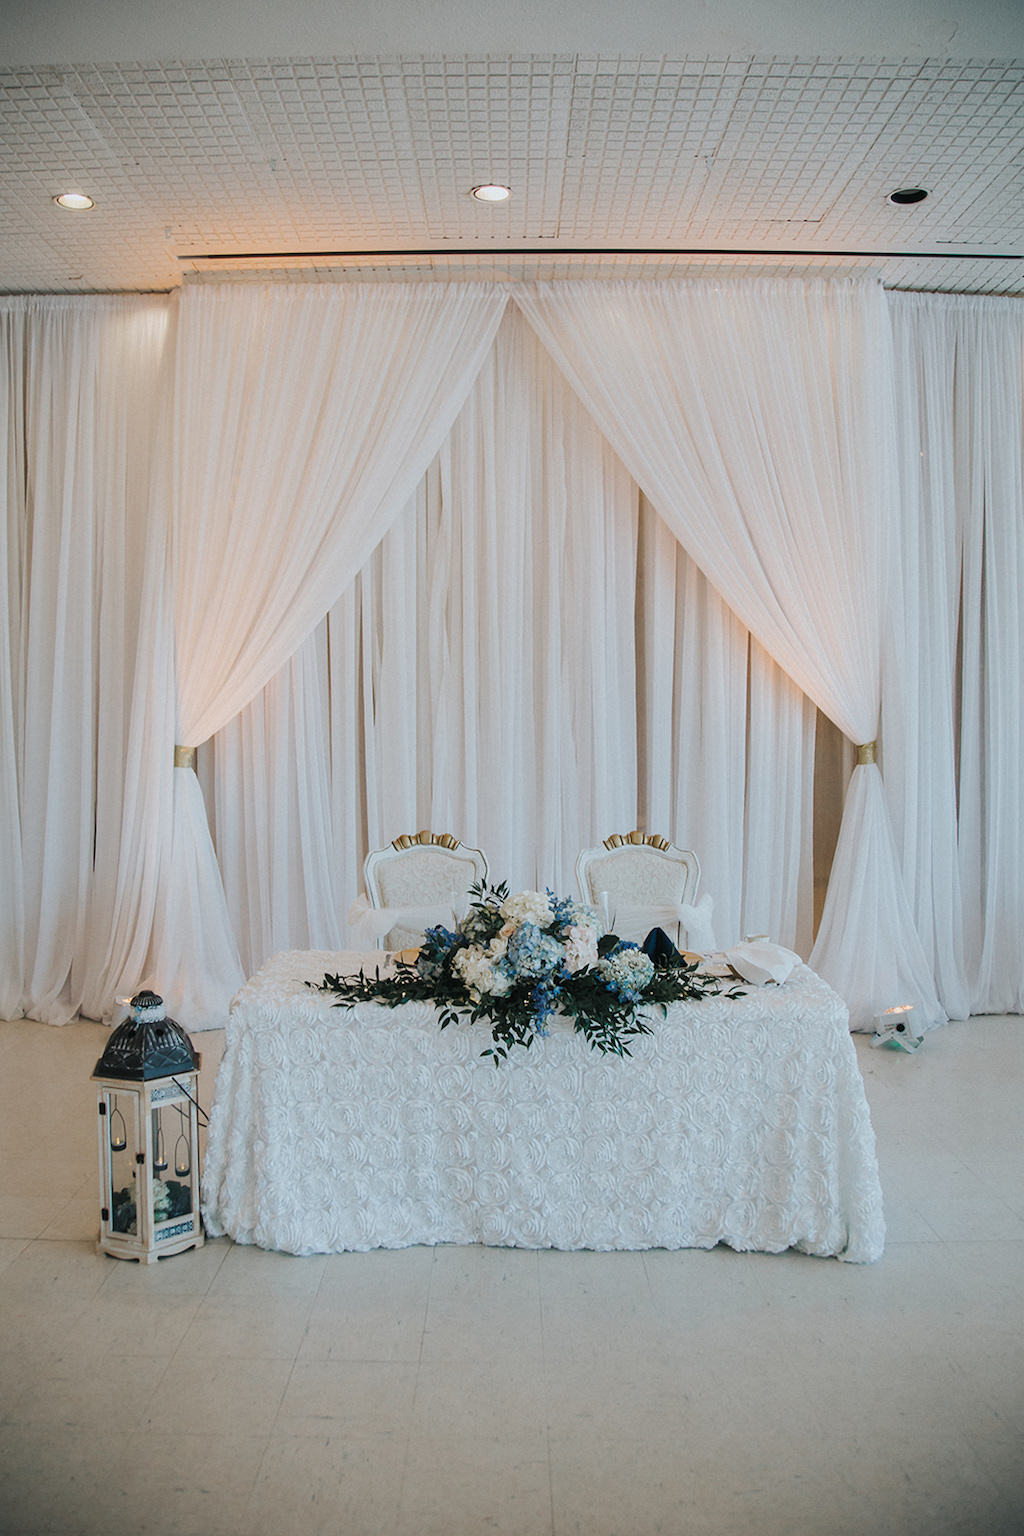 Indoor Wedding Reception Hall Sweetheart Table with White Textured Linen, Fancy Chairs, White Lantern, and White, Blue and Blush Floral with Greenery Centerpieces and White Draping with Off-White Uplighting